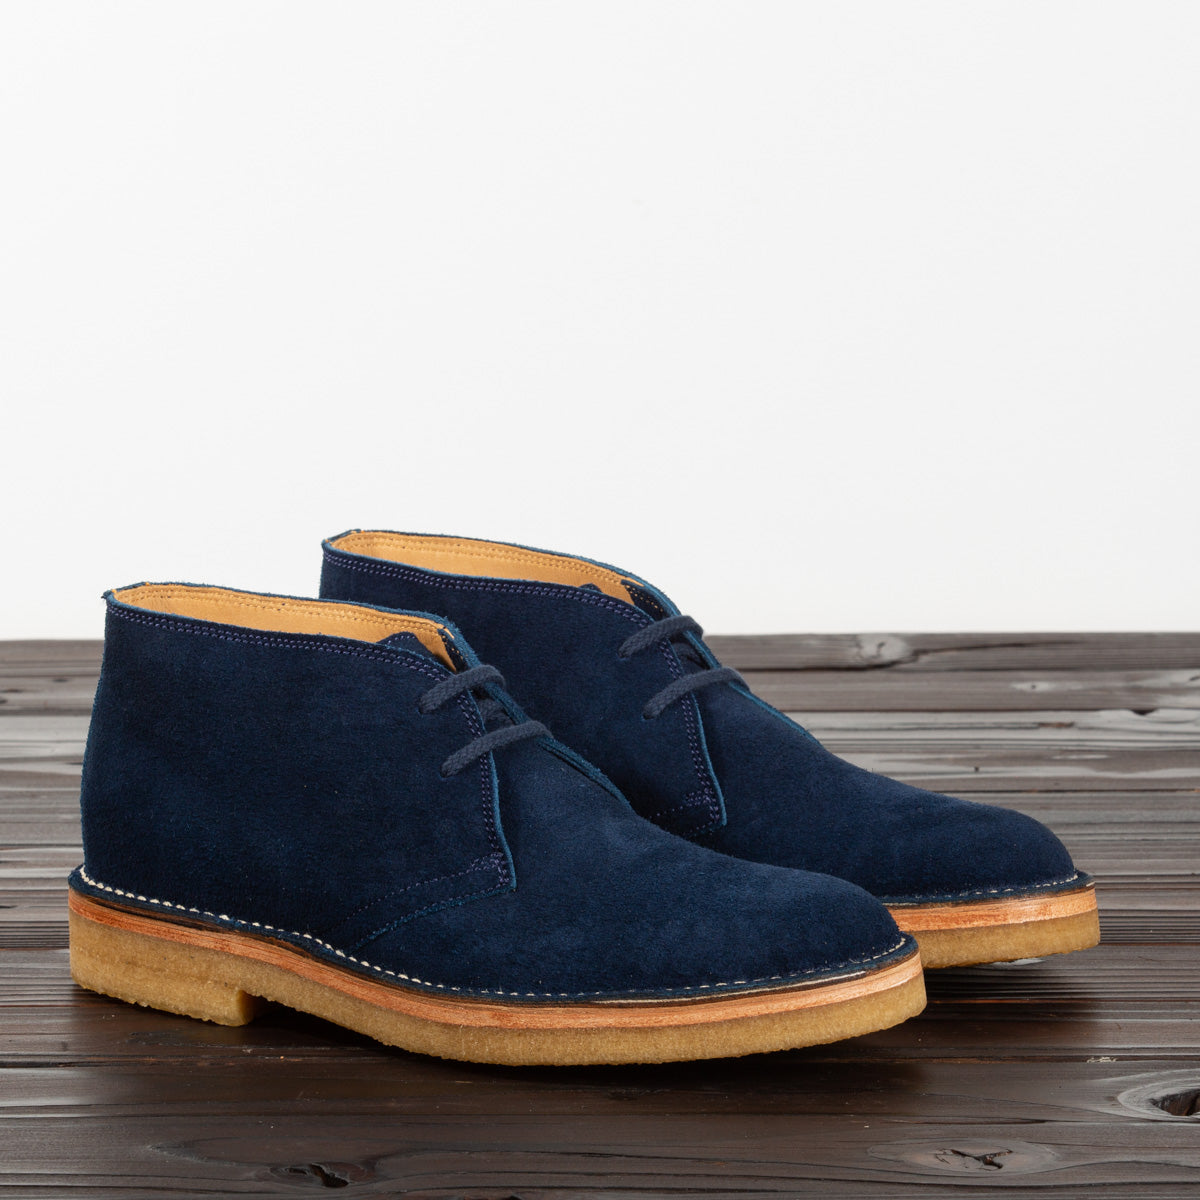 boots navy